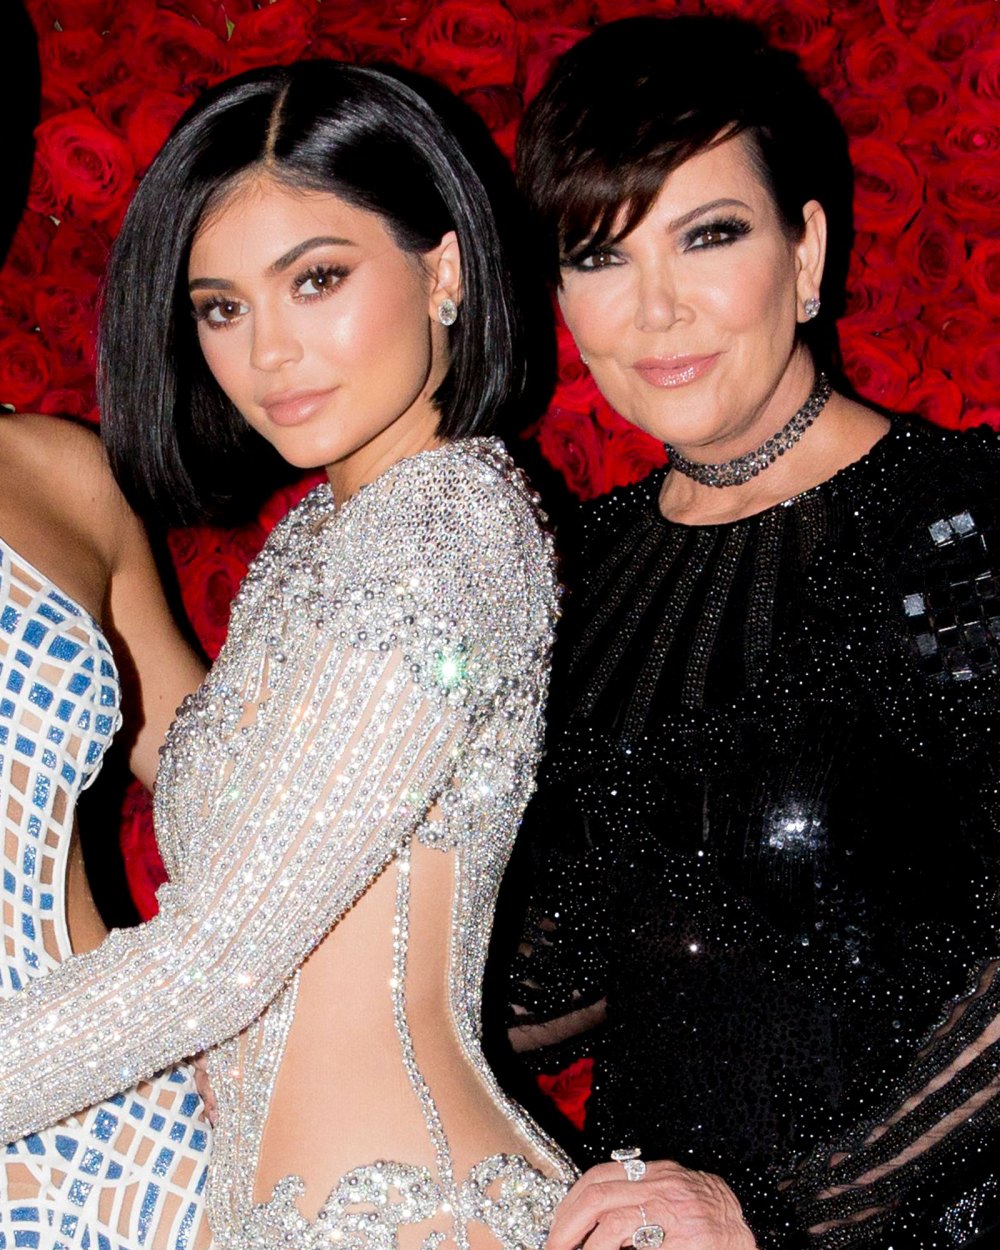 How to Make Kris Jenner's Dirty Martini Recipe: Watch Kylie Jenner Learn